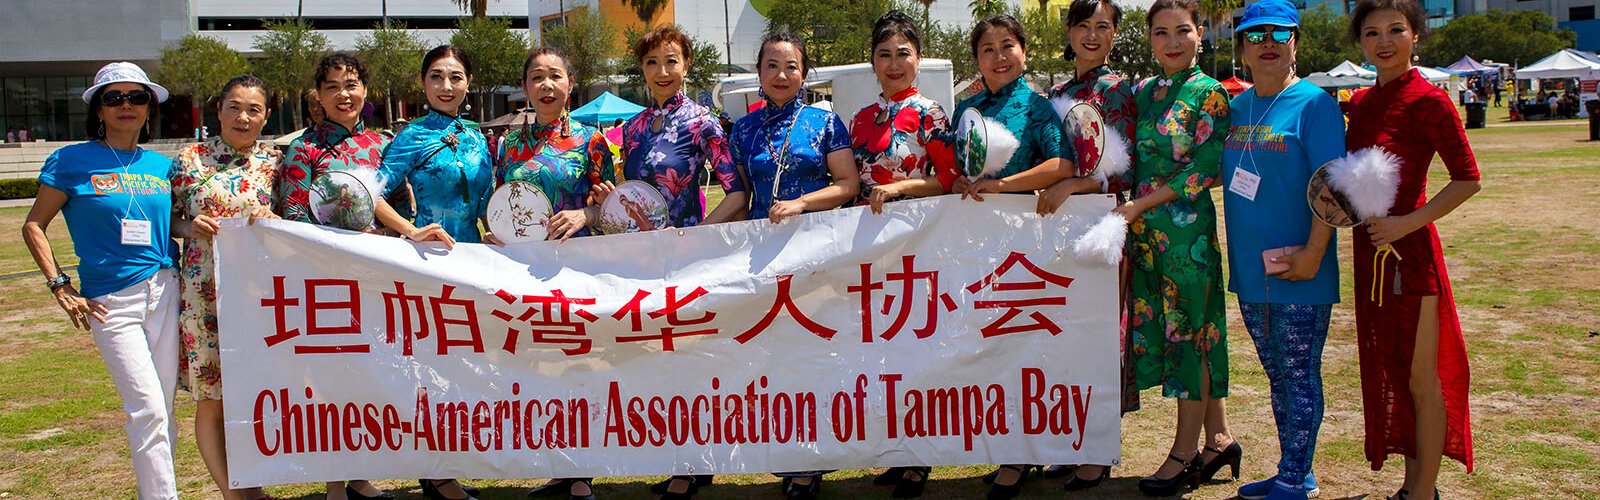 Members of the Chinese-American Association of Tampa Bay at the The Asian Pacific Islander Cultural Festival.